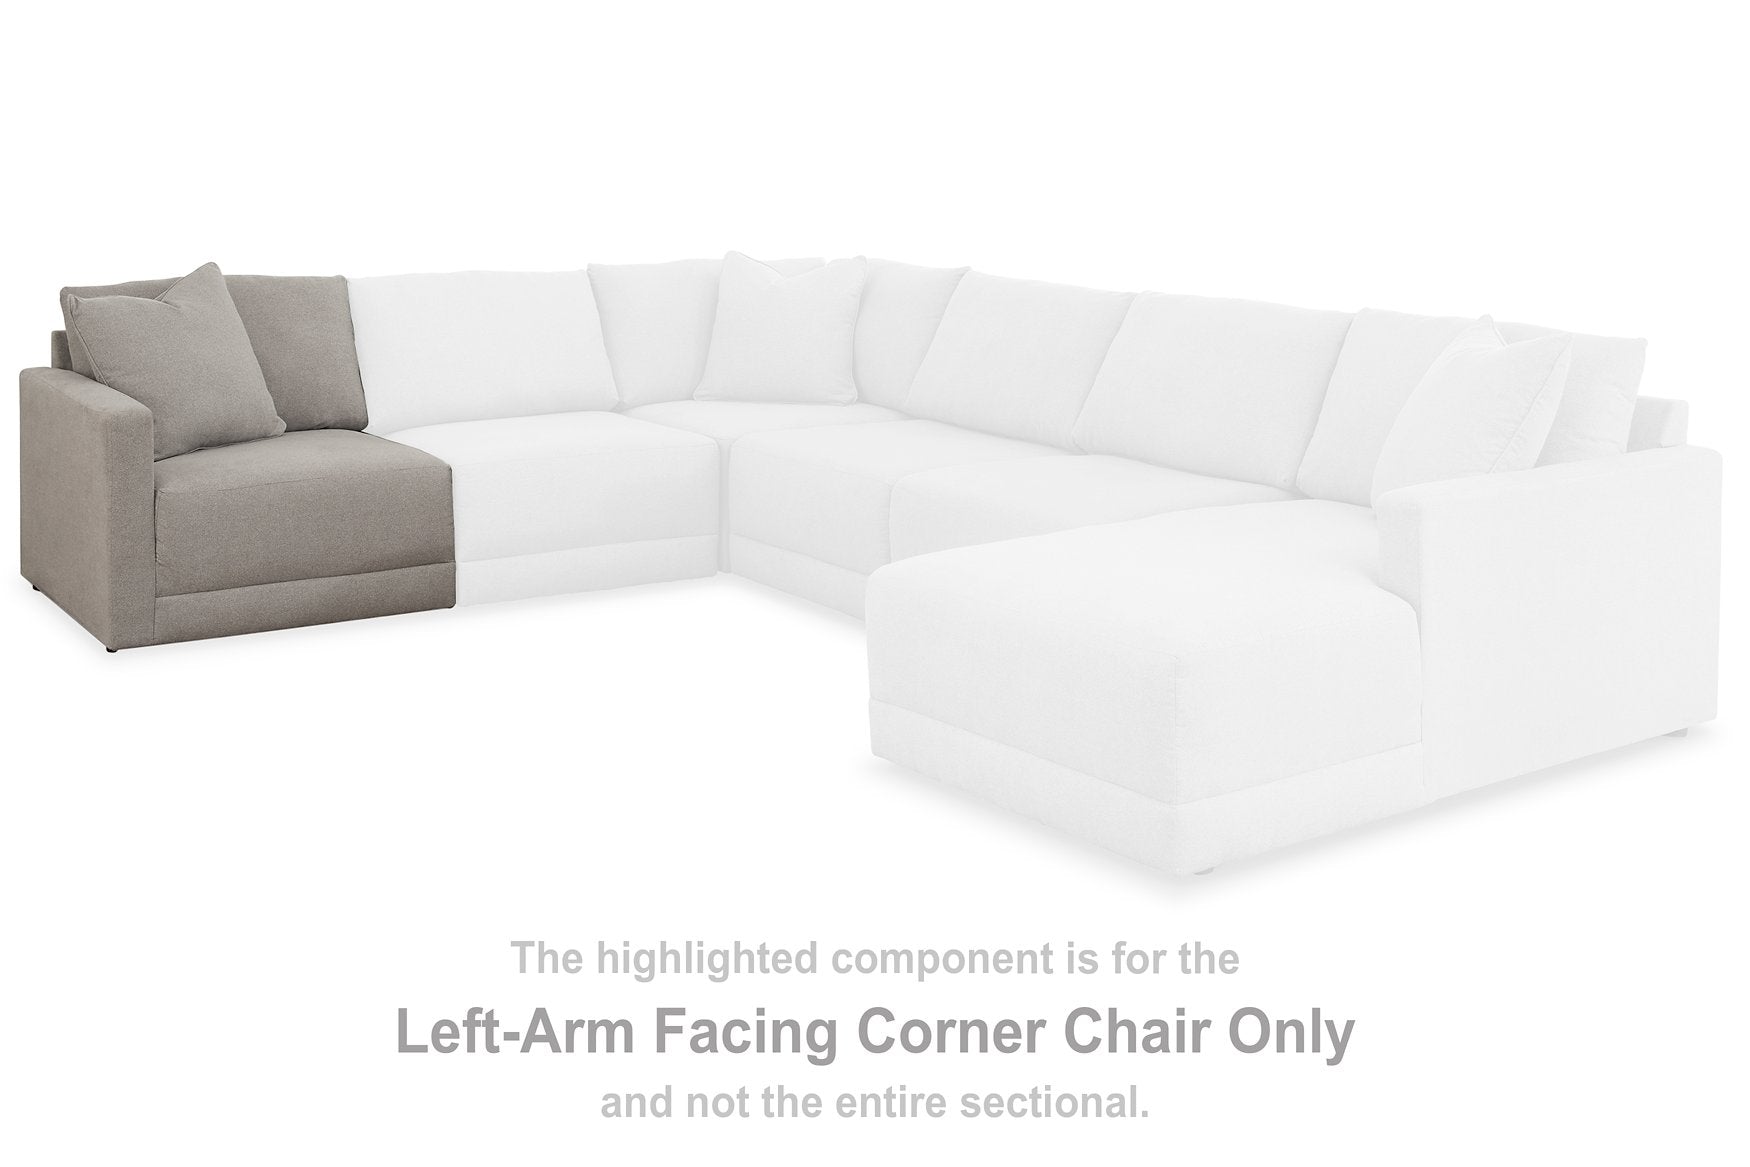 Katany 2-Piece Sectional Loveseat - Half Price Furniture